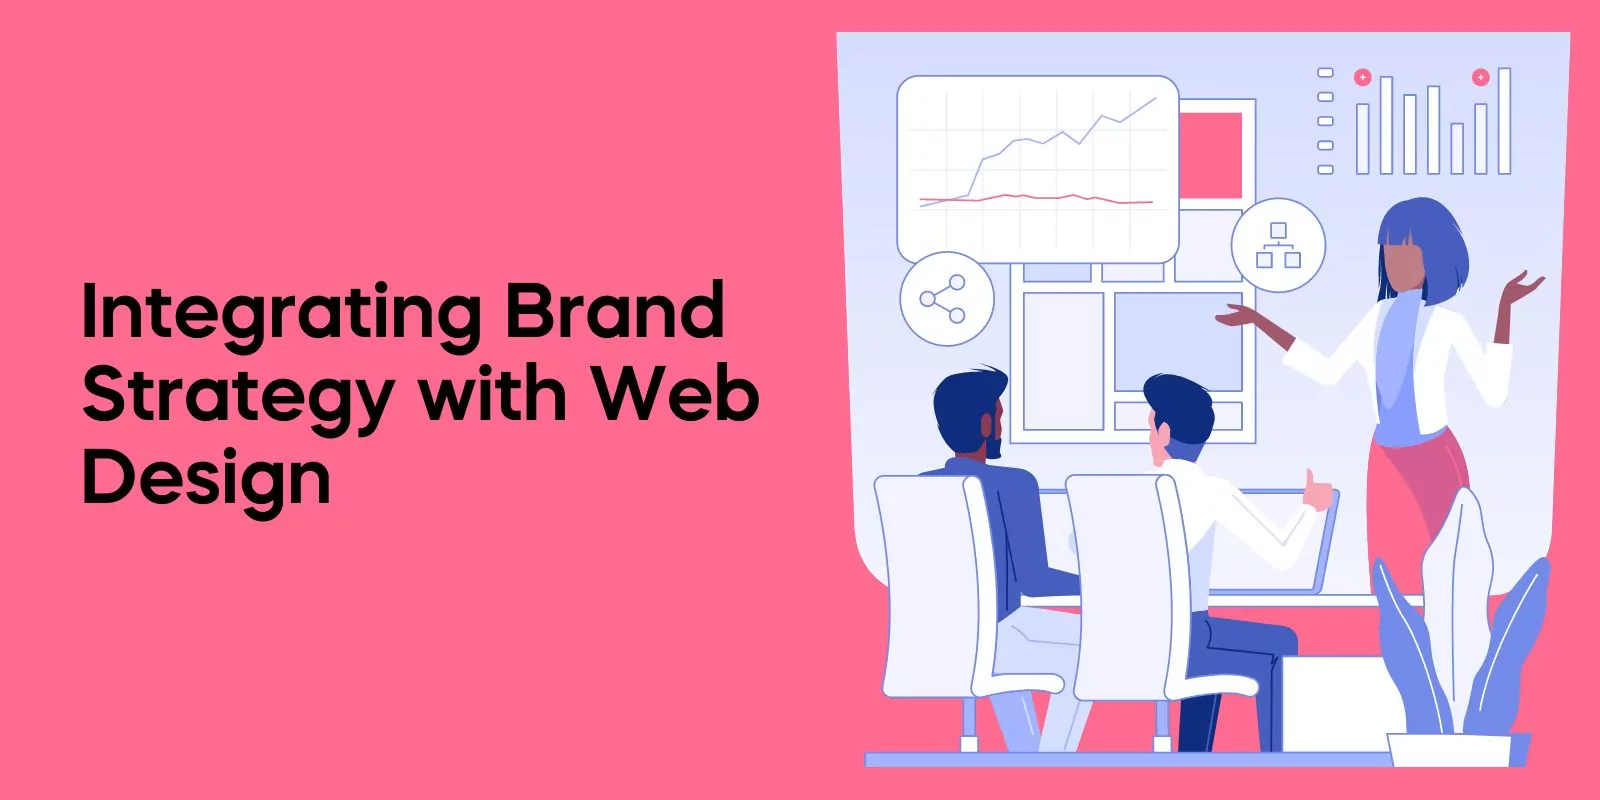 Integrating Brand Strategy with Web Design